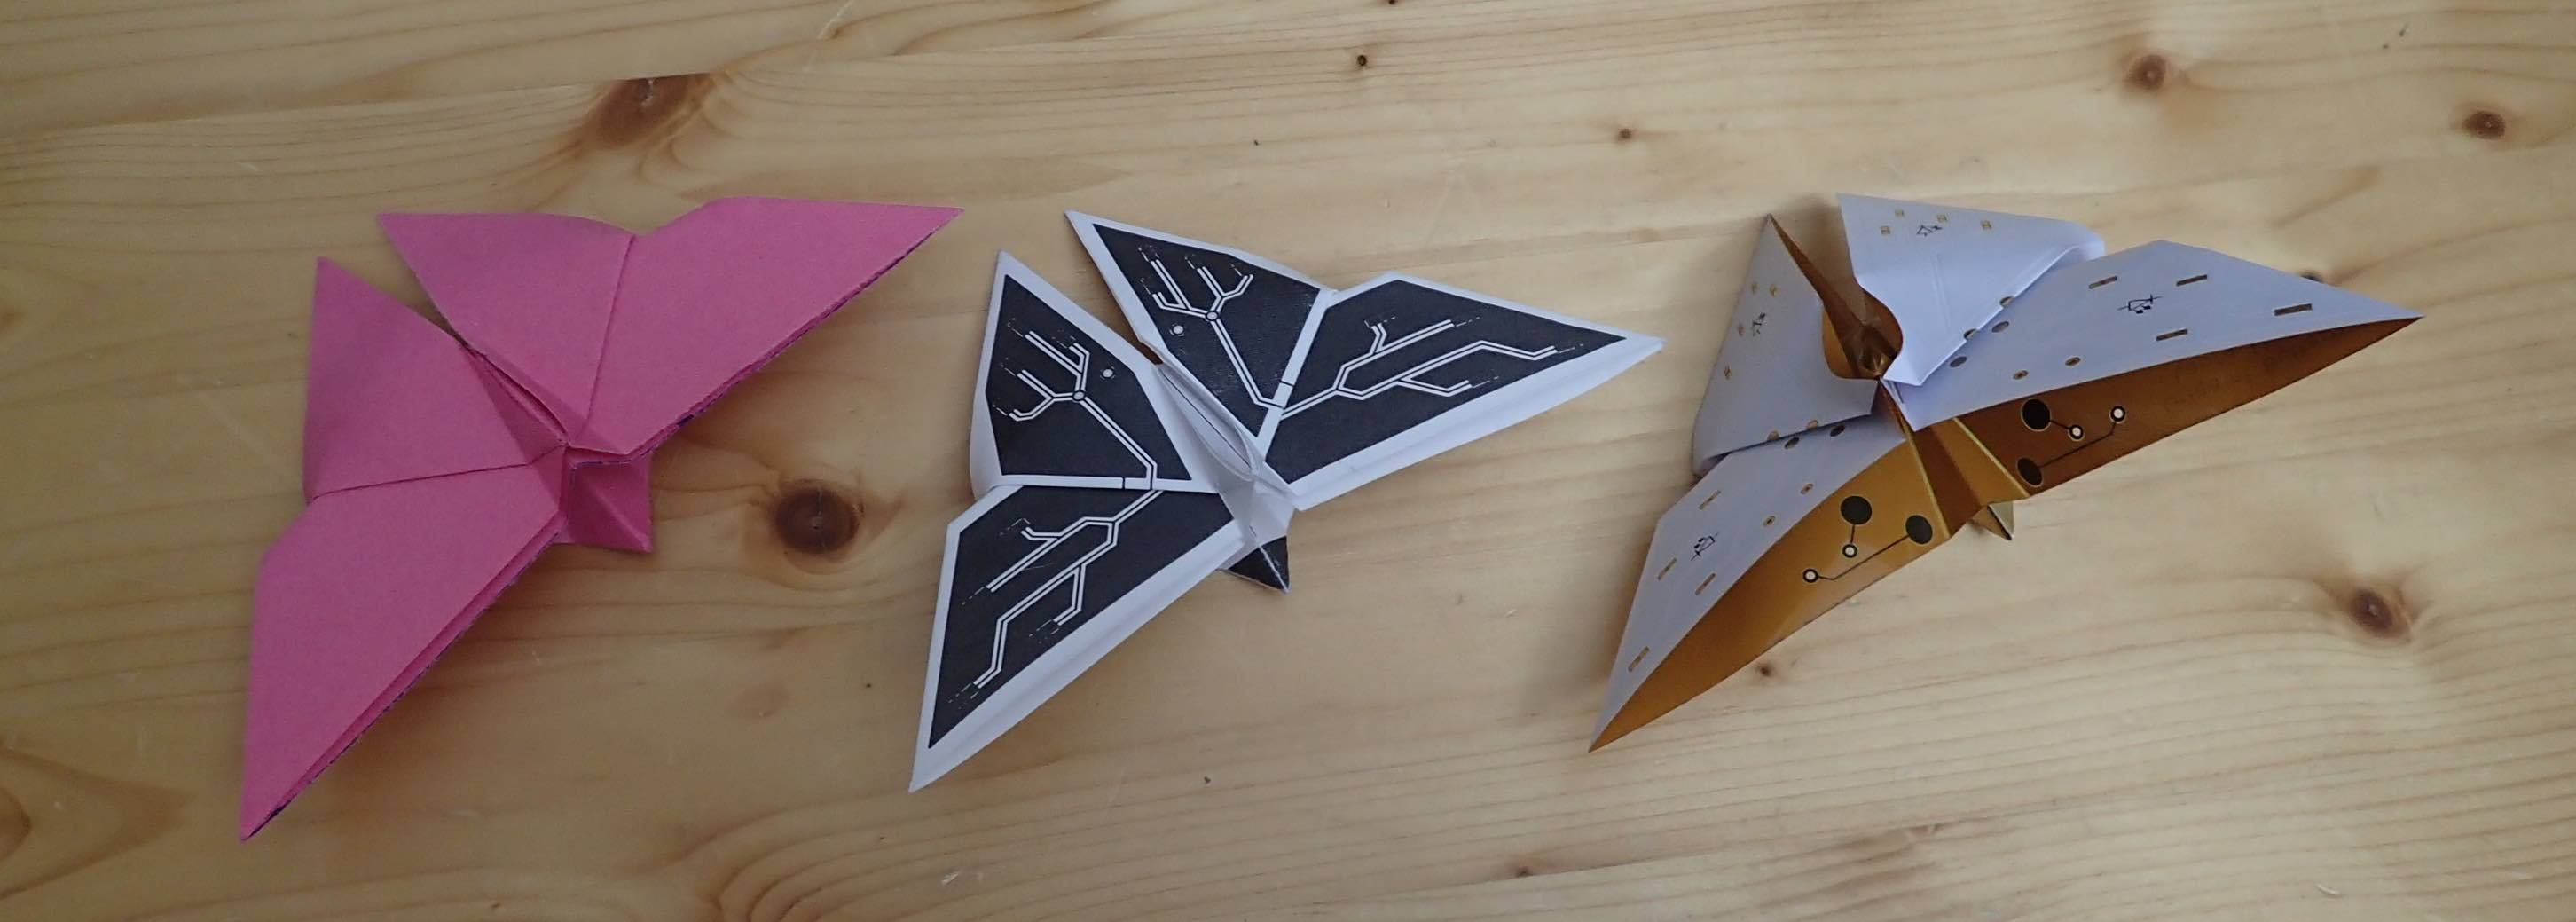 Photo of three origami butterflies, folded using origami paper, printer paper, and flexible PCB